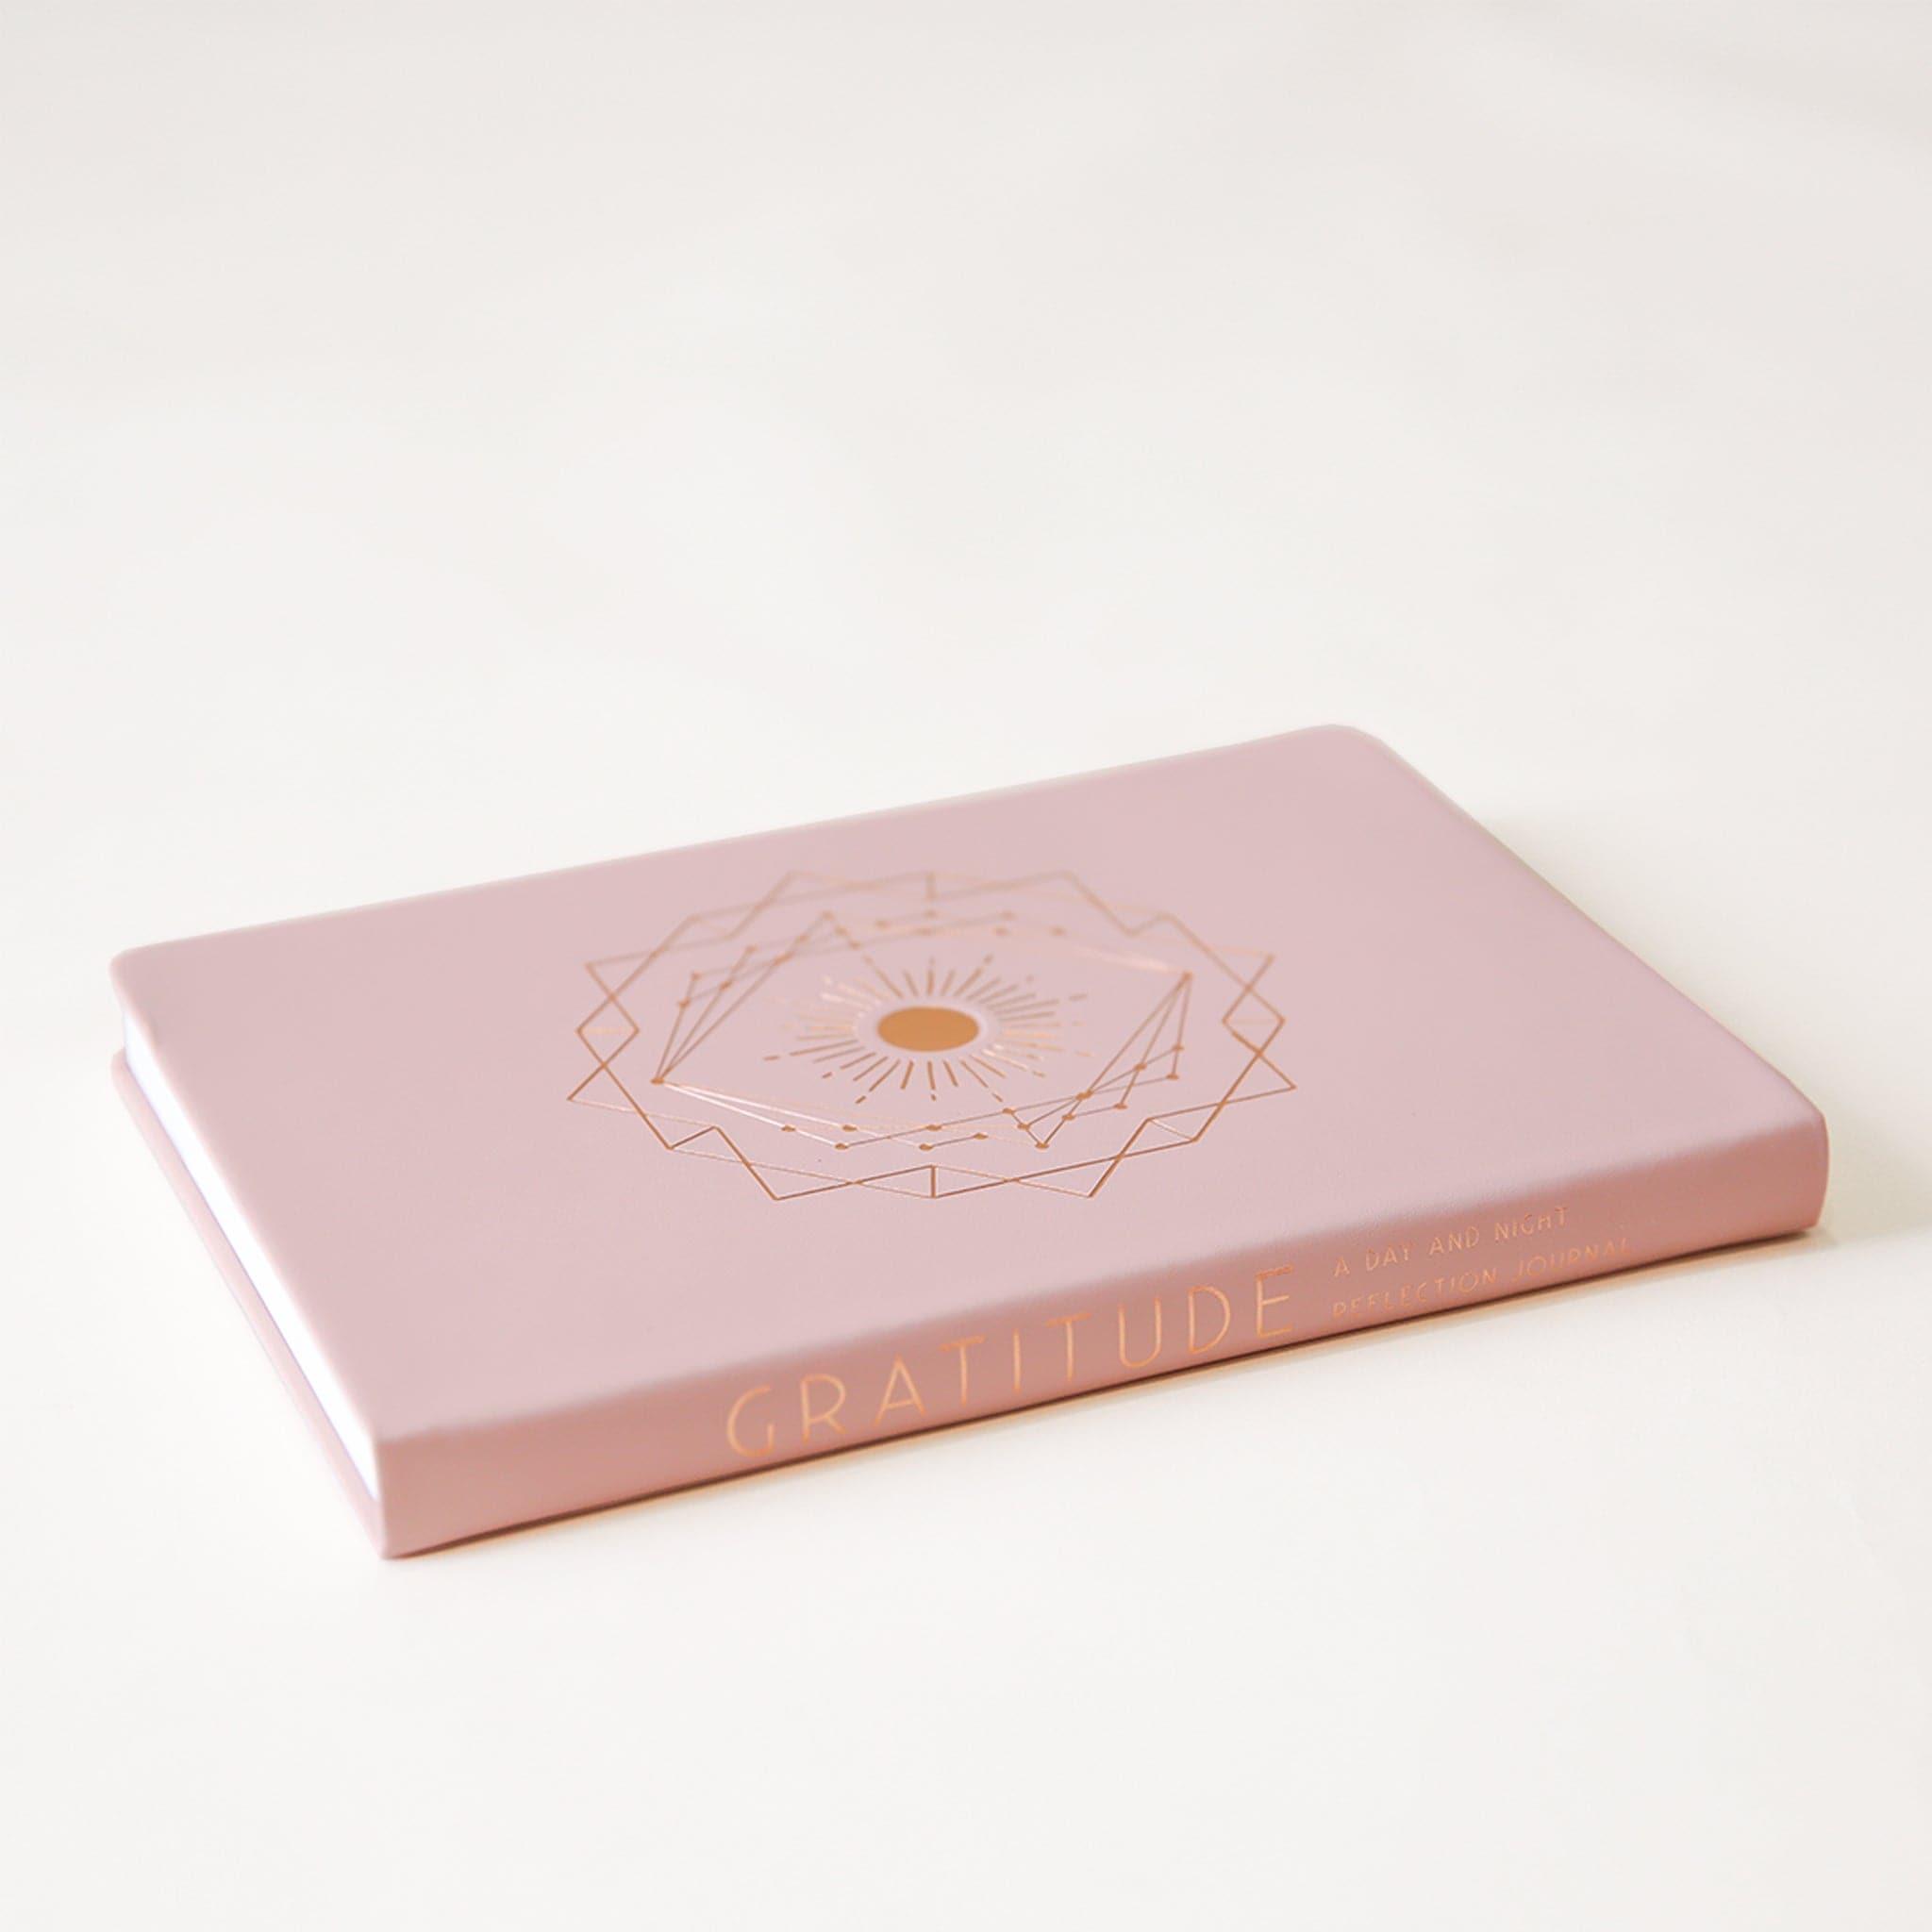 On a cream background is a light pink journal with a geometric gold design in the center and laying on its side in this photo showing the spine of the journal that reads, &quot;Gratitude&quot; in gold letters. 